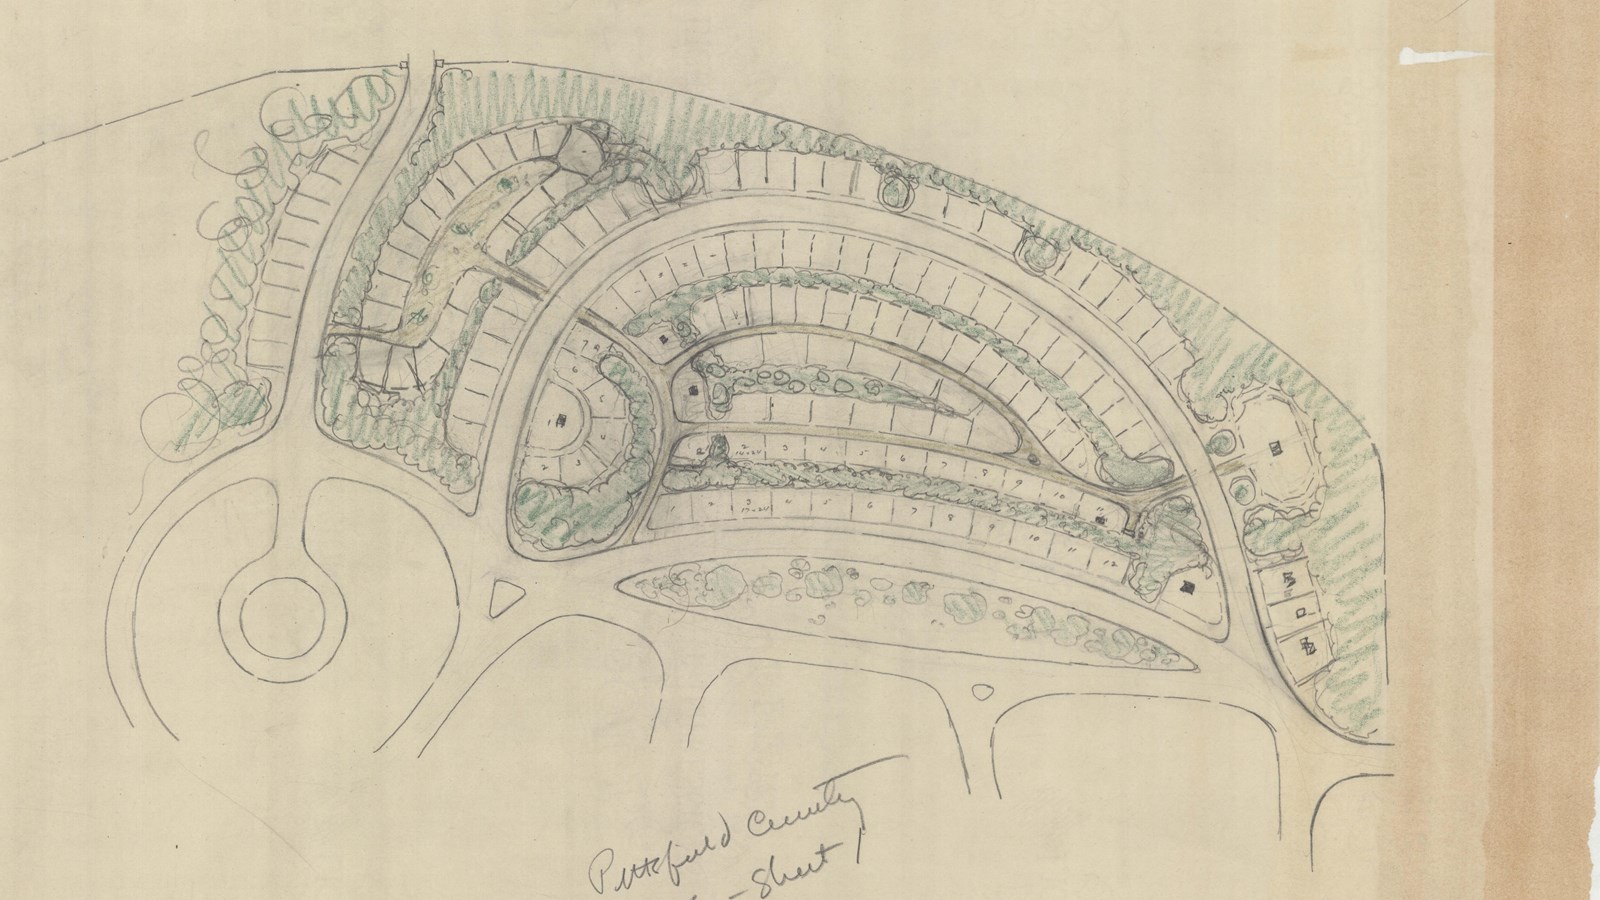 Pencil plan of lots for graves curving around paths with trees in between paths